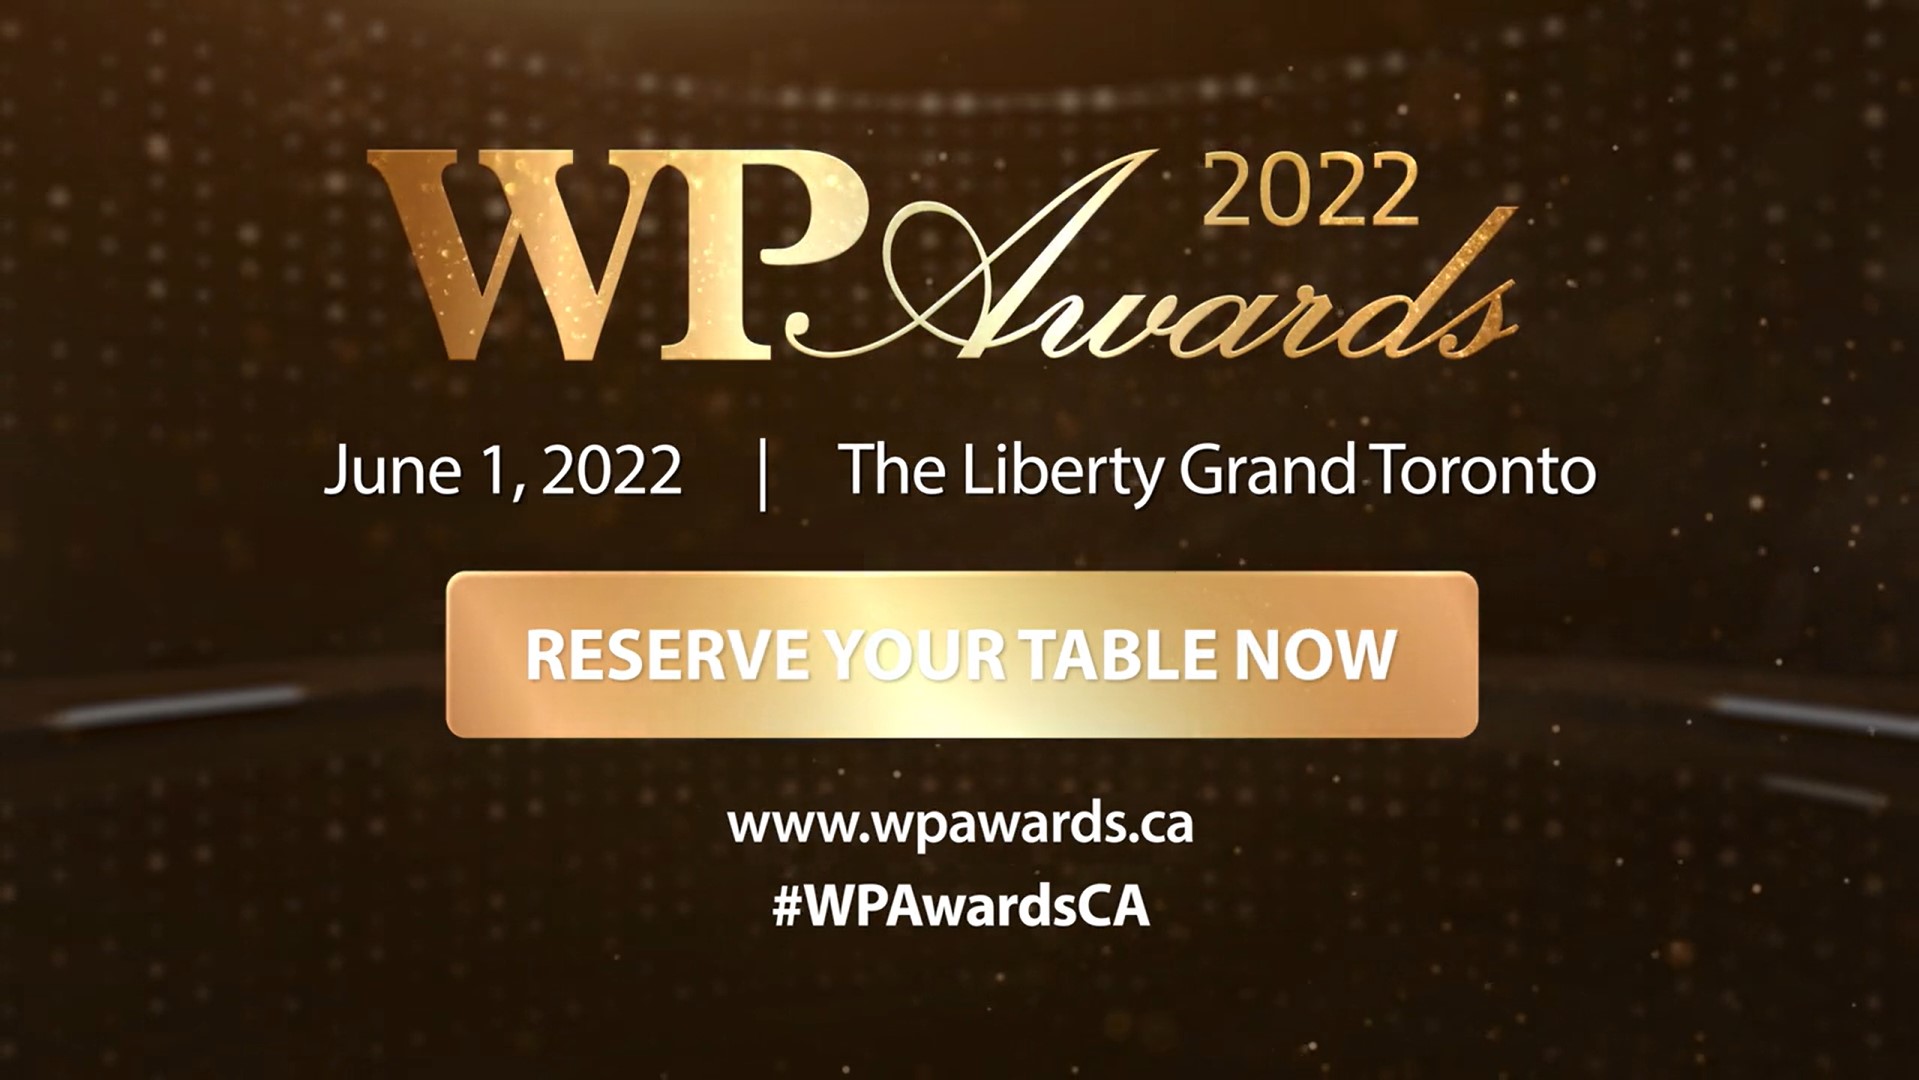 We're back in-person! What to expect at the highly anticipated 2022 WP Awards